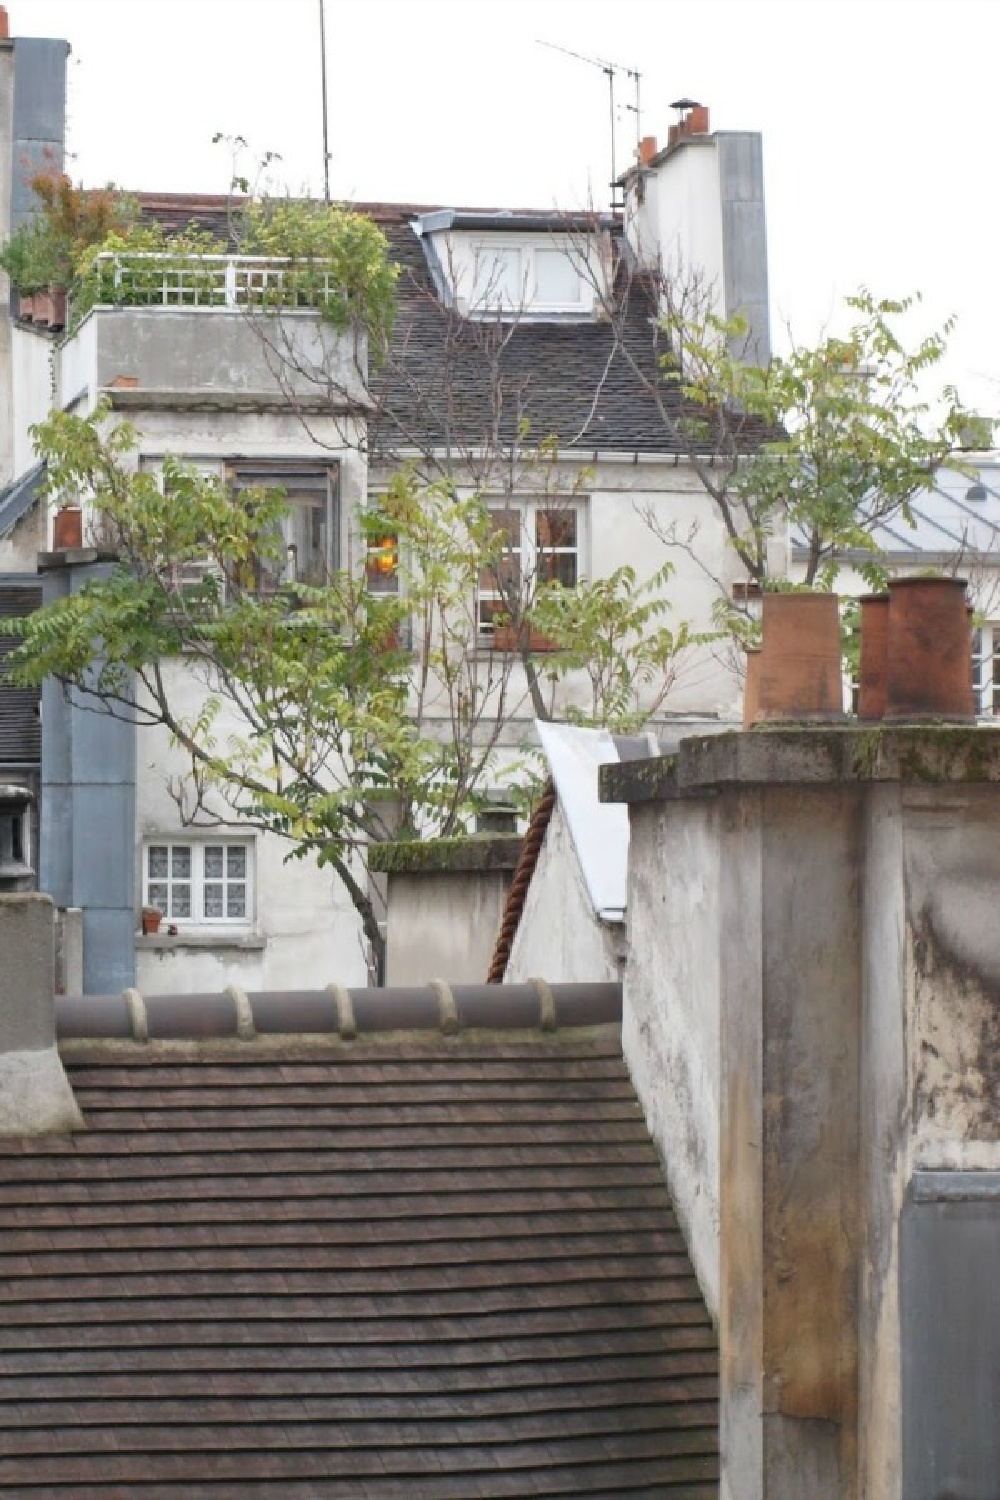 View from kitchen window of rooftops and greenery in Paris apartment near Notre Dame - Hello Lovely Studio.